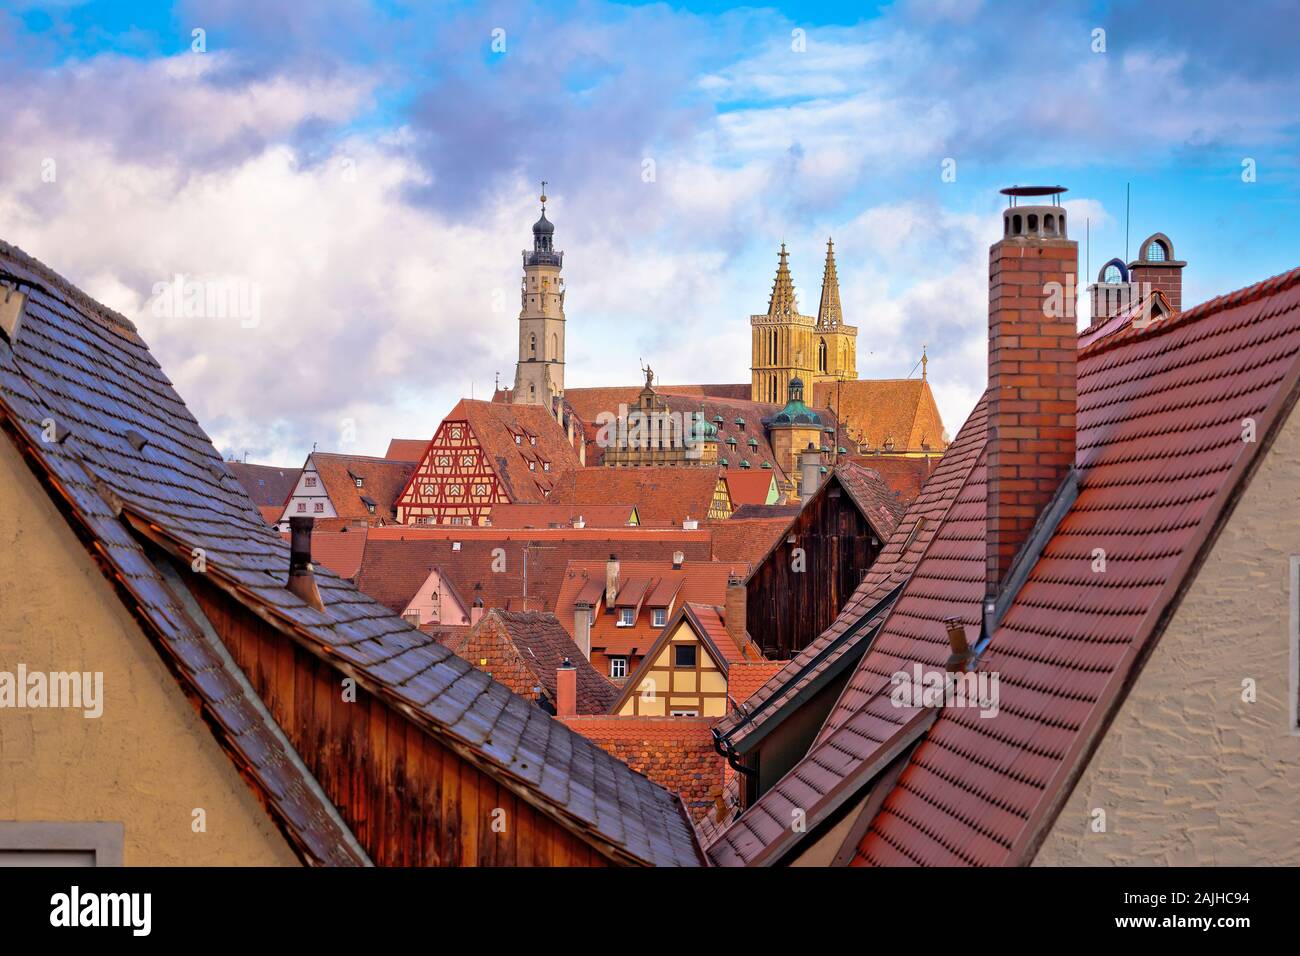 Rooftops and landmarks of historic town of Rothenburg ob der Tauber view, Romantic road of Bavaria region of Germany Stock Photo